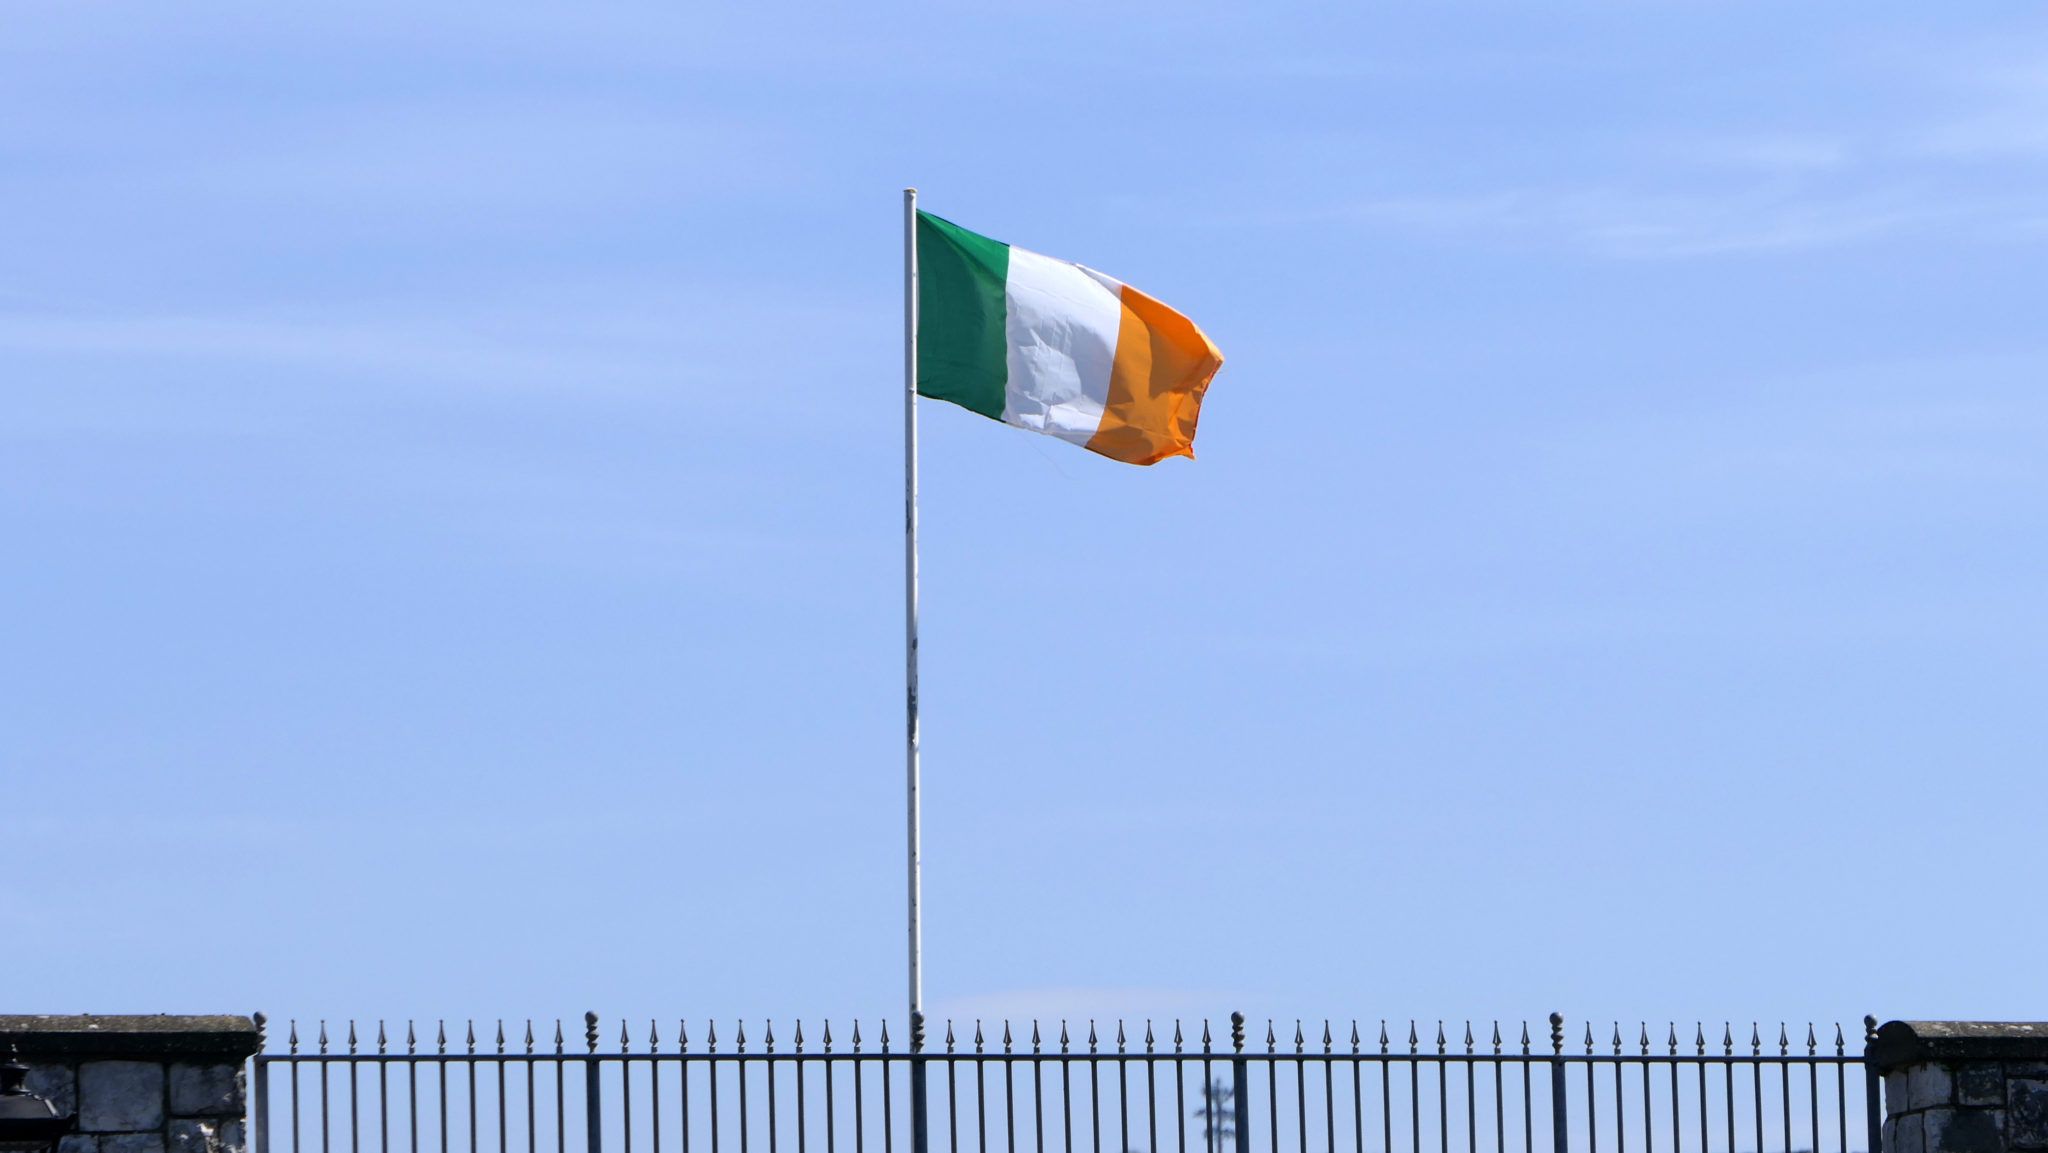 Councillor calls on Donegal to ignore request to fly flag half mast for royal funeral